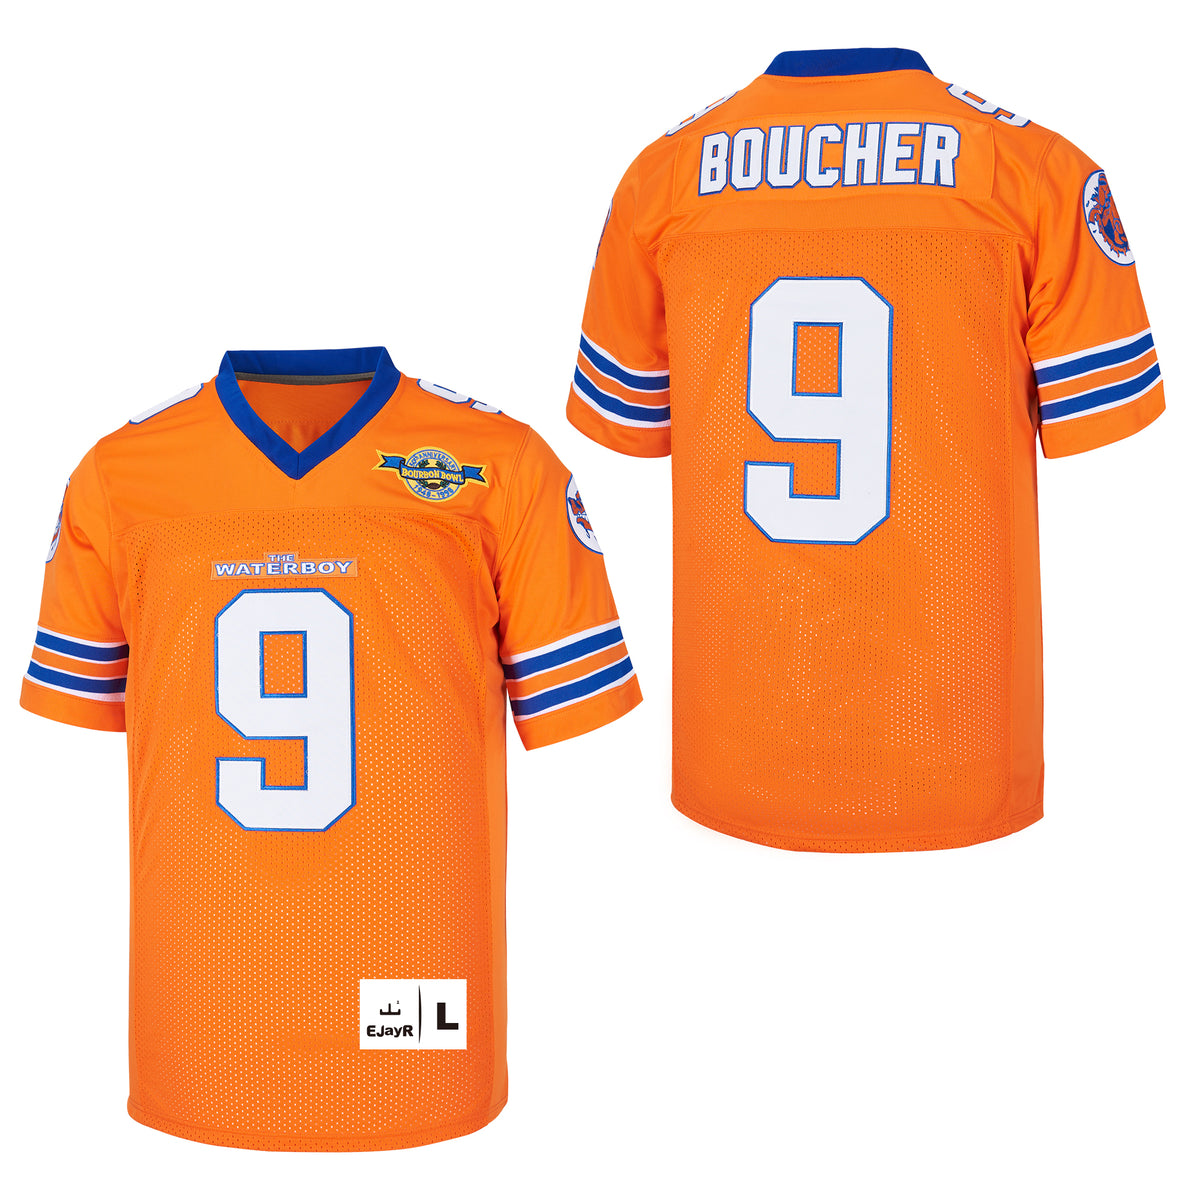 The Waterboy 'Bobby Boucher' Football Jersey